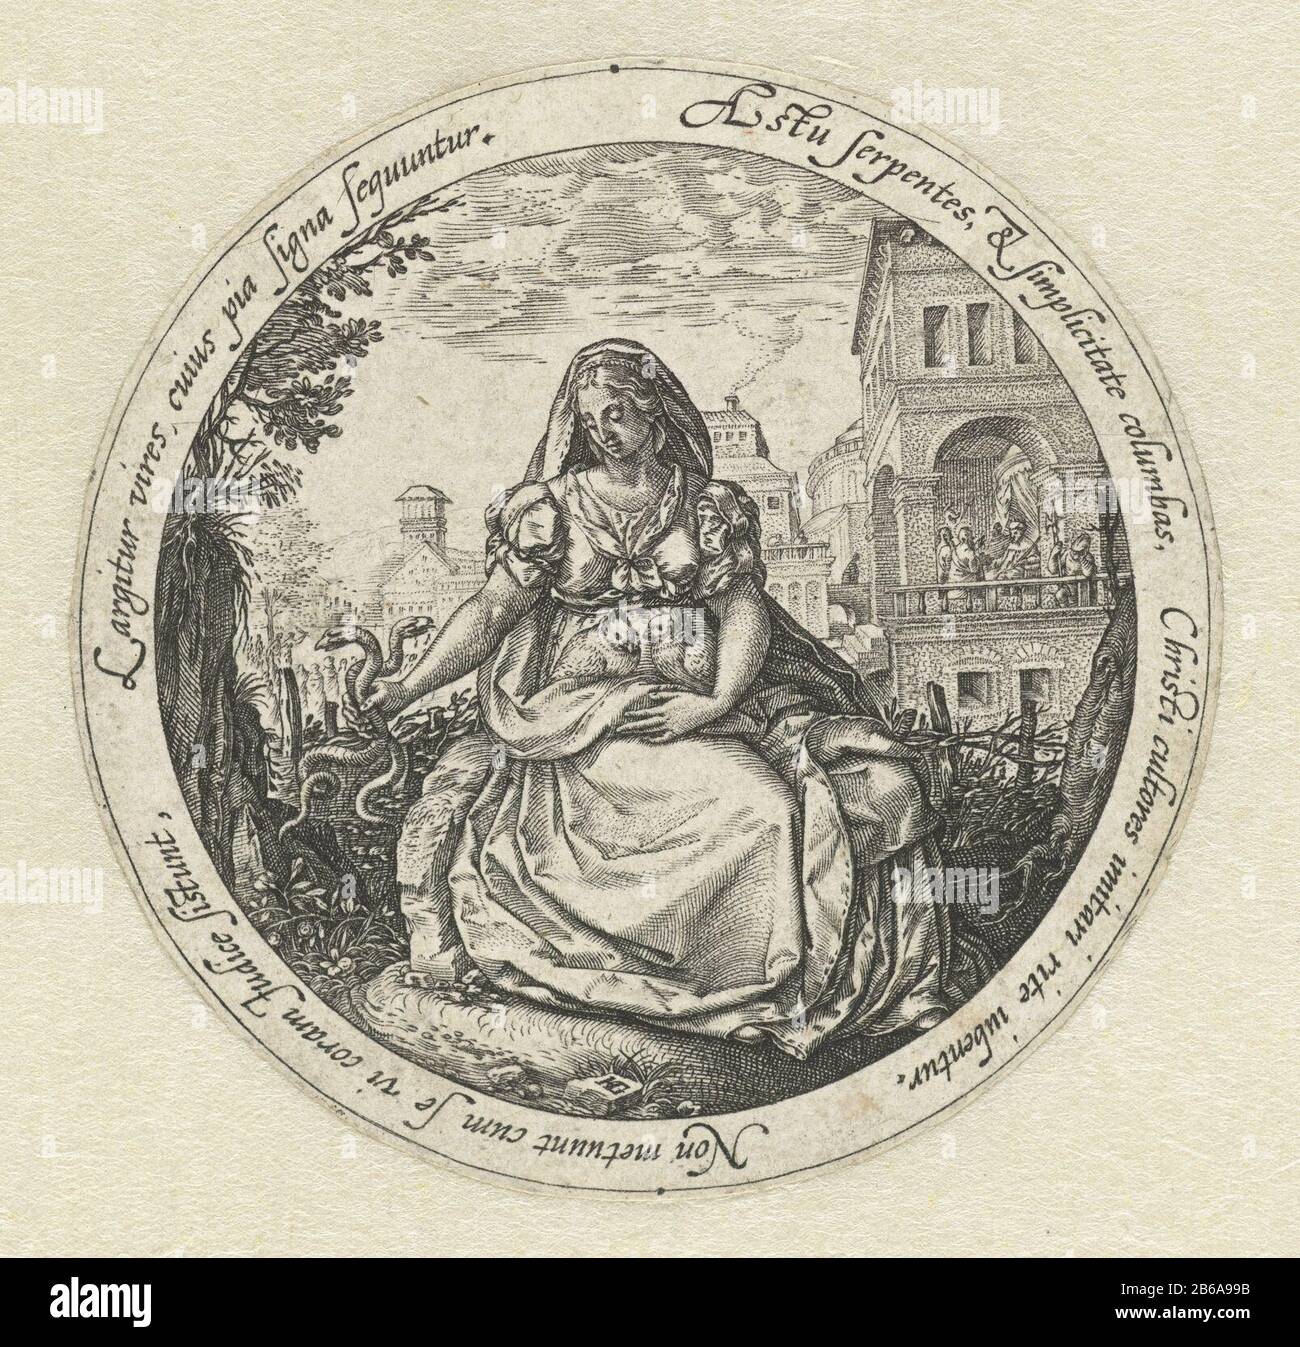 Allegory of Prudence and Innocence Round representation of a woman in a garden. On her lap two doves, two snakes in her right hand. In the background right a group of people in the loggia of a large building. To show a Latin tekst. Manufacturer : printmaker: Hendrick Goltzius (listed building) in its design: Hendrick Goltzius Publisher: Hendrick Goltzius Place manufacture: Haarlem Dating: ca. 1580 - ca. 1582 Physical features: car material: paper Technique: engra (printing process) dimensions: d 74 mm Subject: Prudence, 'Prudentia'; 'Prudenza '(Ripa)  one of the Four Cardinal VirtuesInnocence Stock Photo